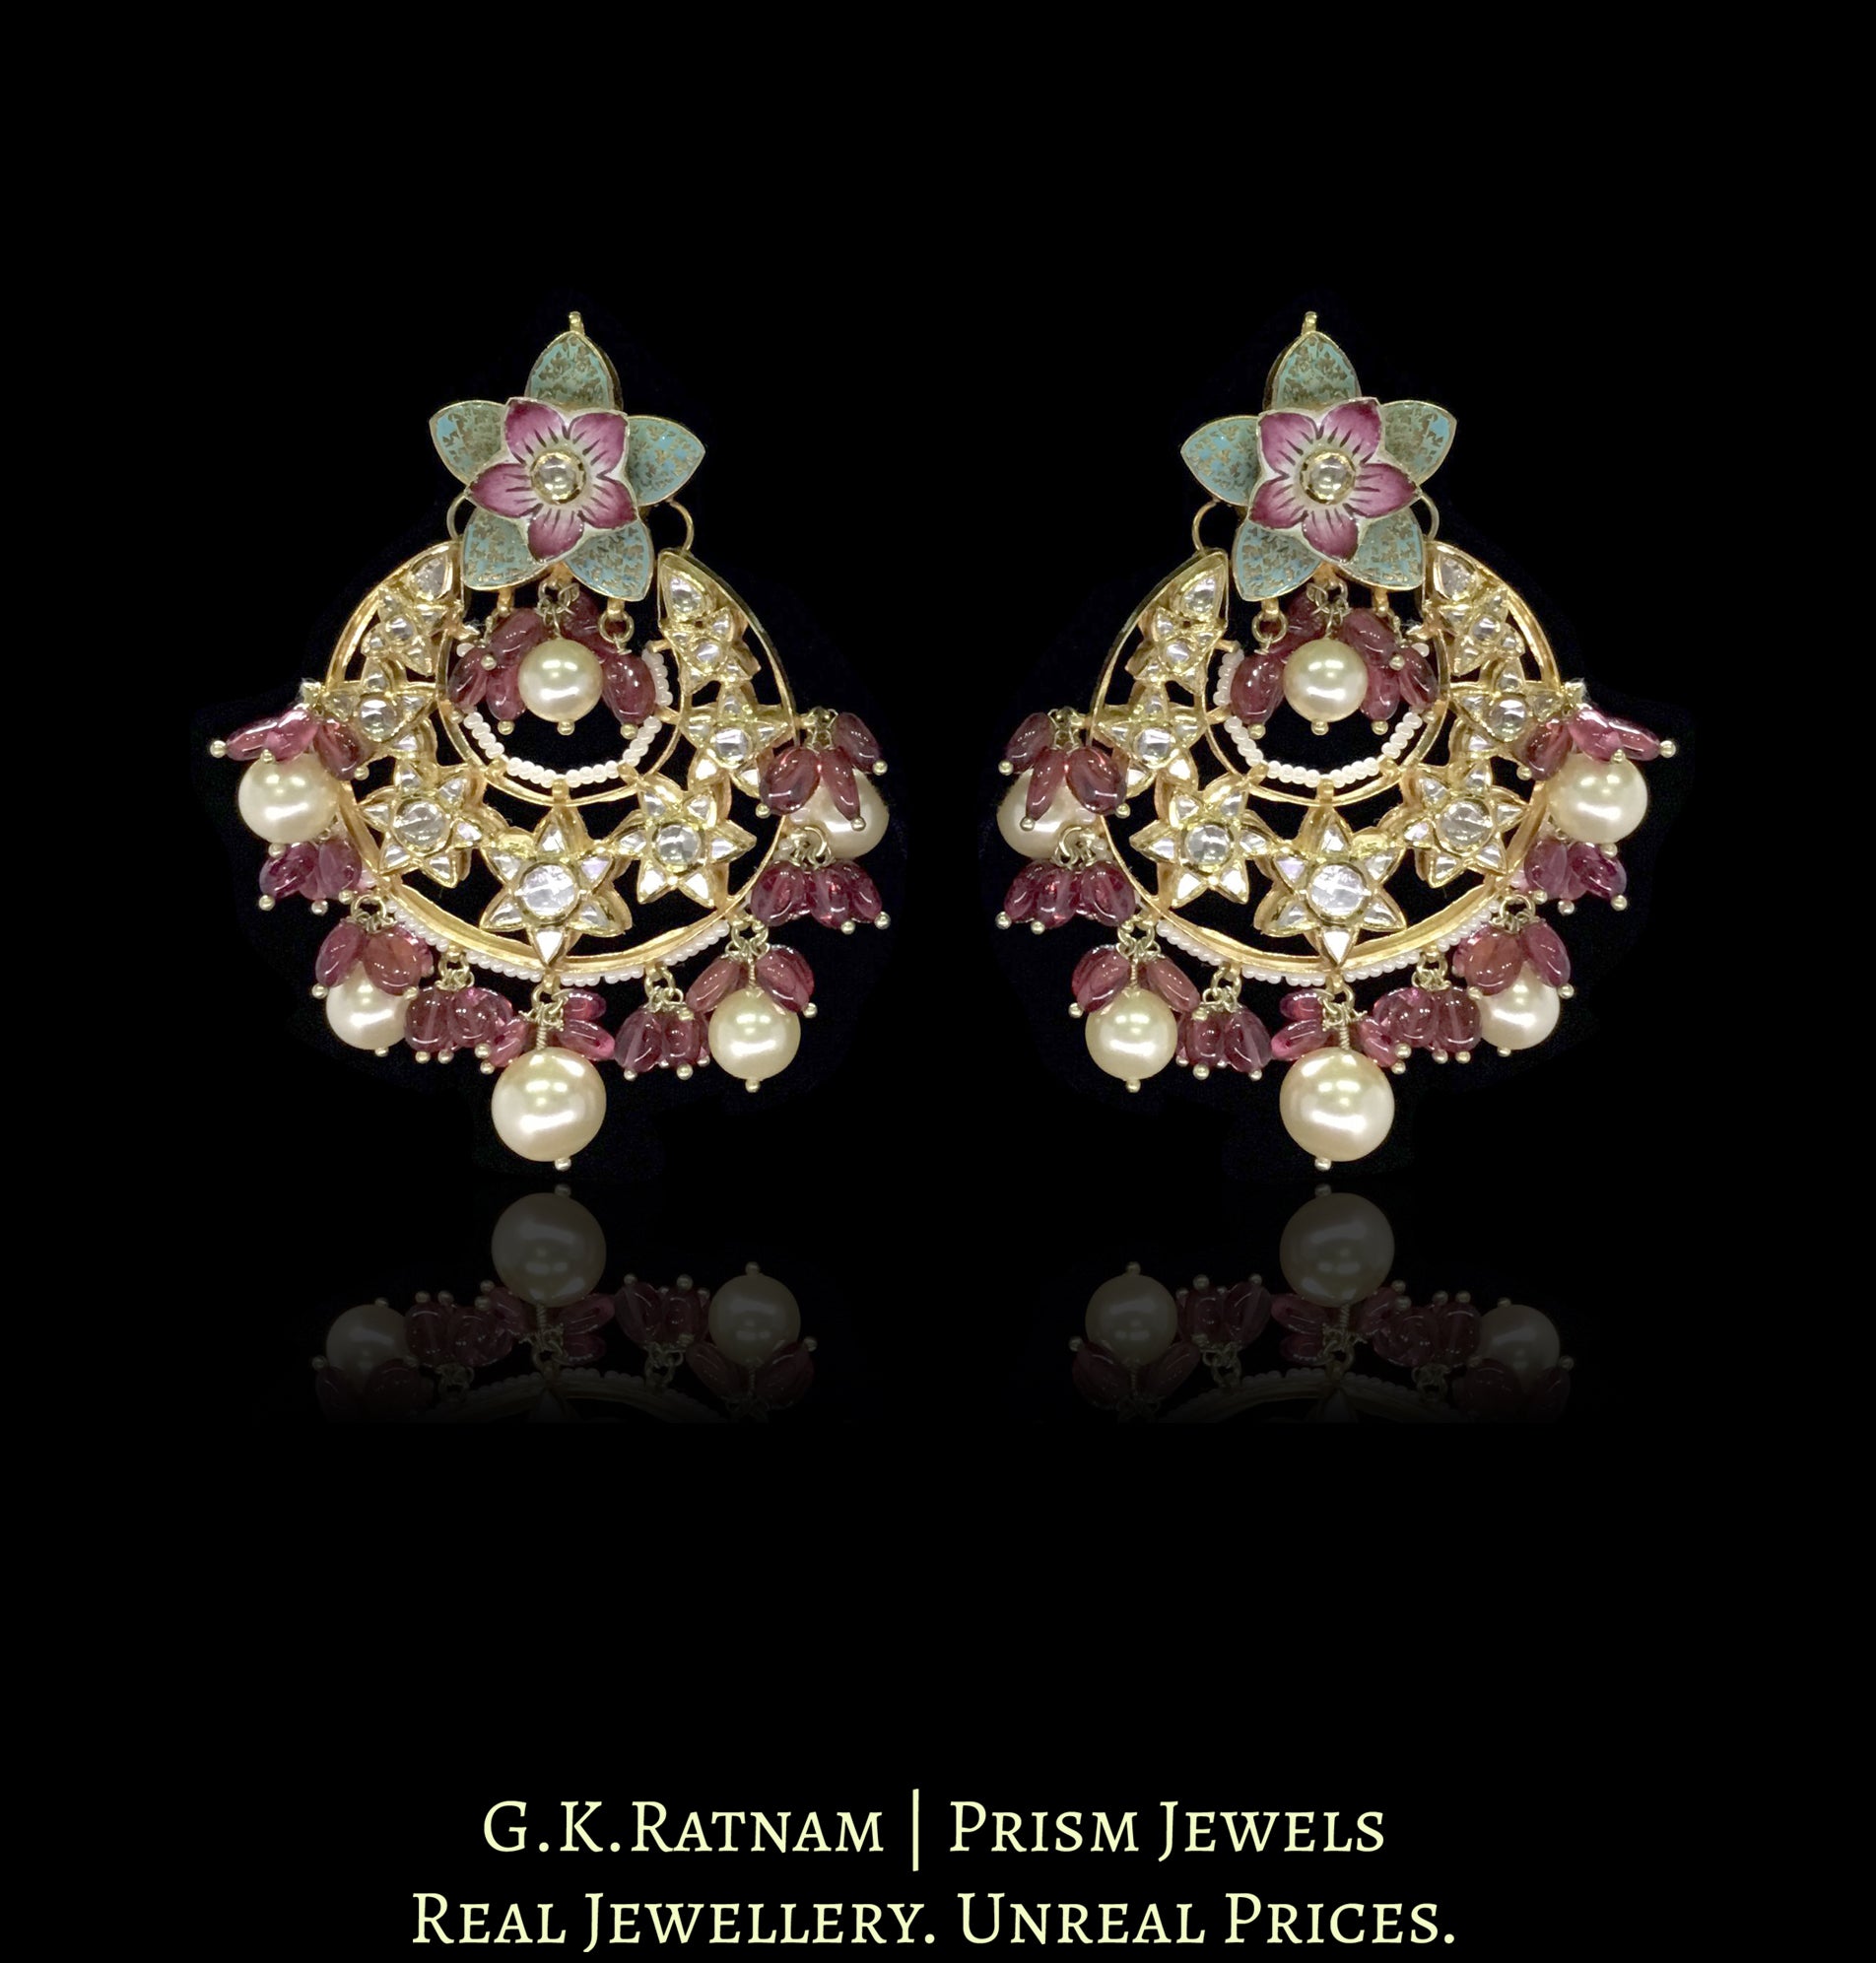 18k Gold and Diamond Polki Chand Bali Earring Pair with Pink and Turquoise Enamelled Floral Tops